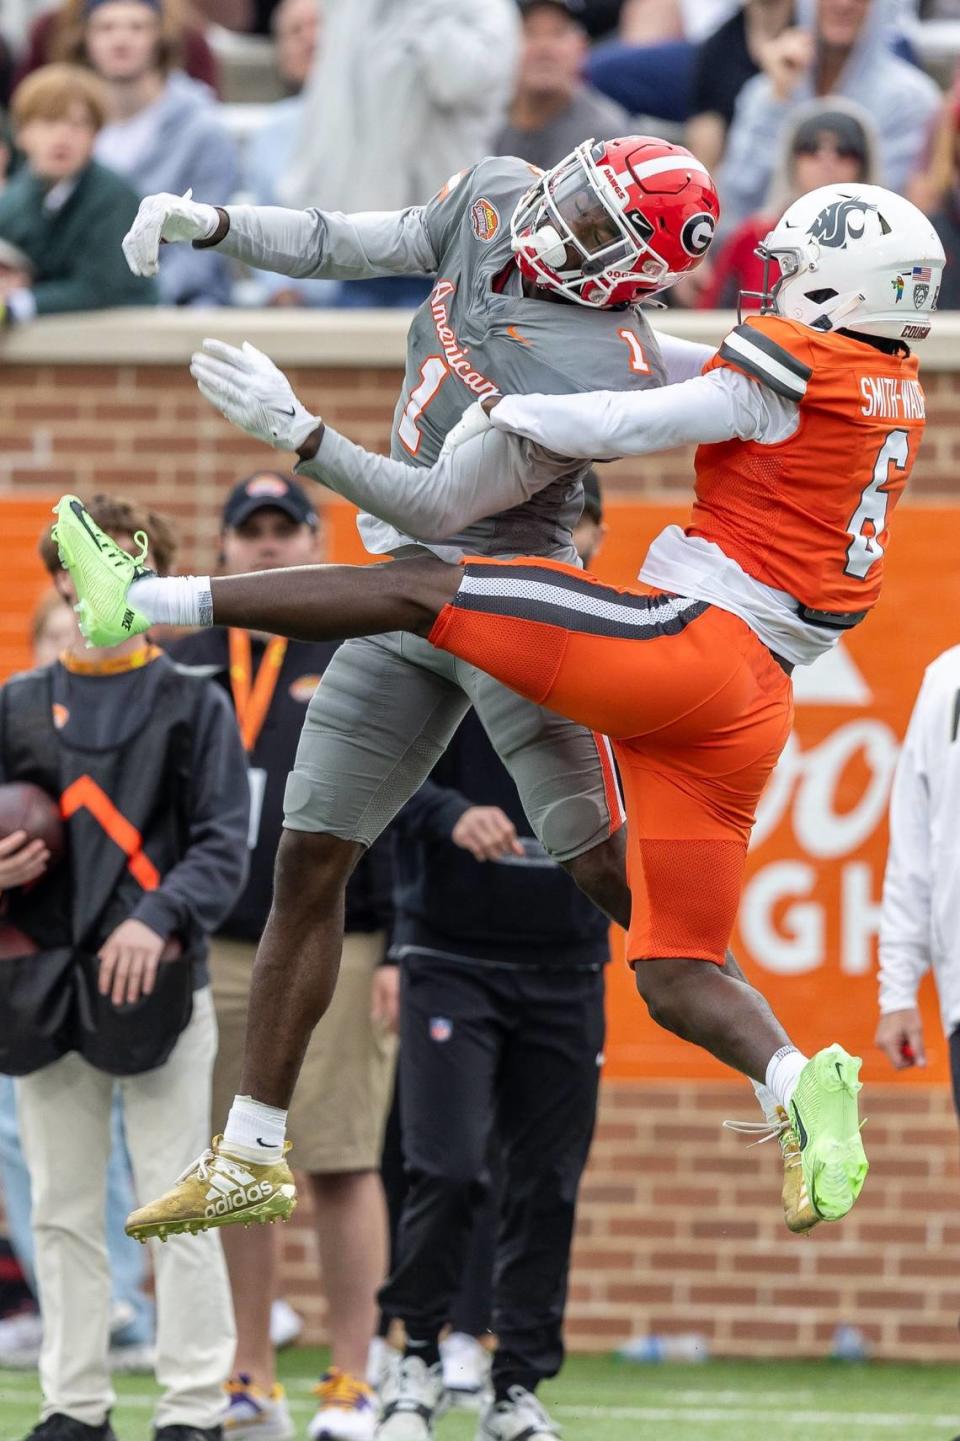 Feb 3, 2024; Mobile, AL, USA; American wide receiver Marcus Rosemy-Jacksaint of Georgia (1) and National defensive back Chau Smith-Wade of Washington State (6) contest a ball during the second half of the 2024 Senior Bowl football game at Hancock Whitney Stadium. Mandatory Credit: Vasha Hunt-USA TODAY Sports